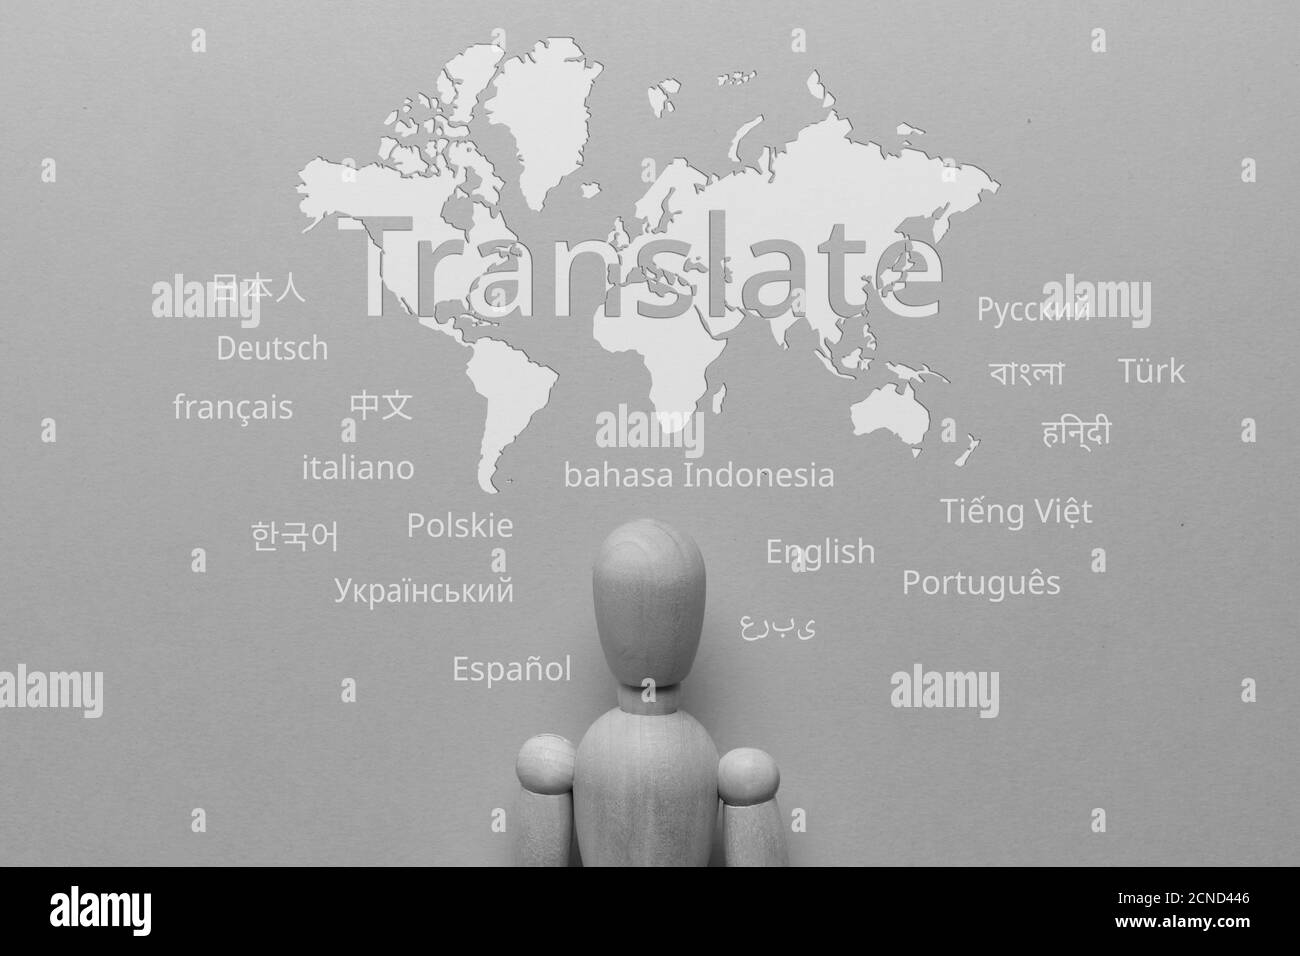 translate from different languages on an abstract world map. Stock Photo